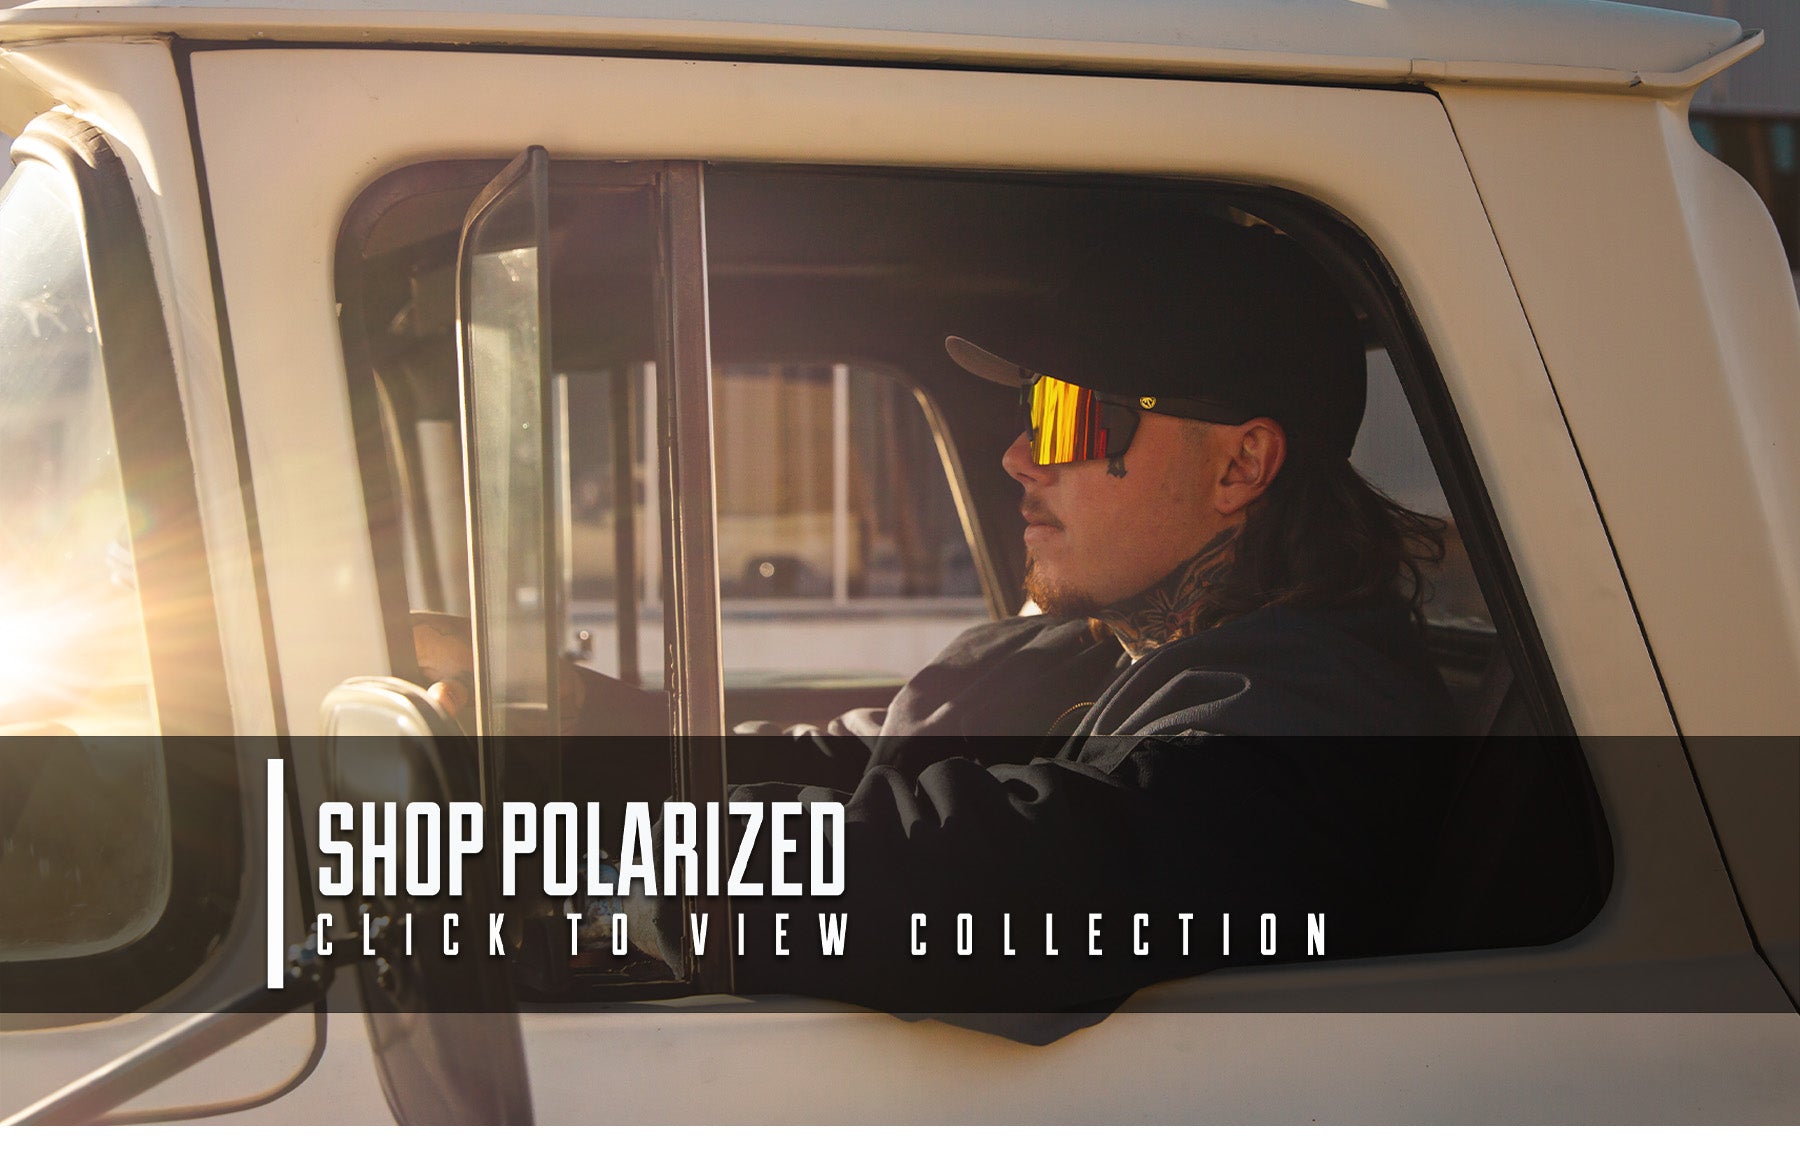 Heat Wave Visual Australia. Fully Customisable Sunglasses. Shop Online Free Same Day Shipping Australia Wide. Afterpay it. AS/NZS1337.1 Safety Glasses. From The Shop To The Street And Everywhere In Between. Shop Polarized Sunglasses. Heat Wave Glasses